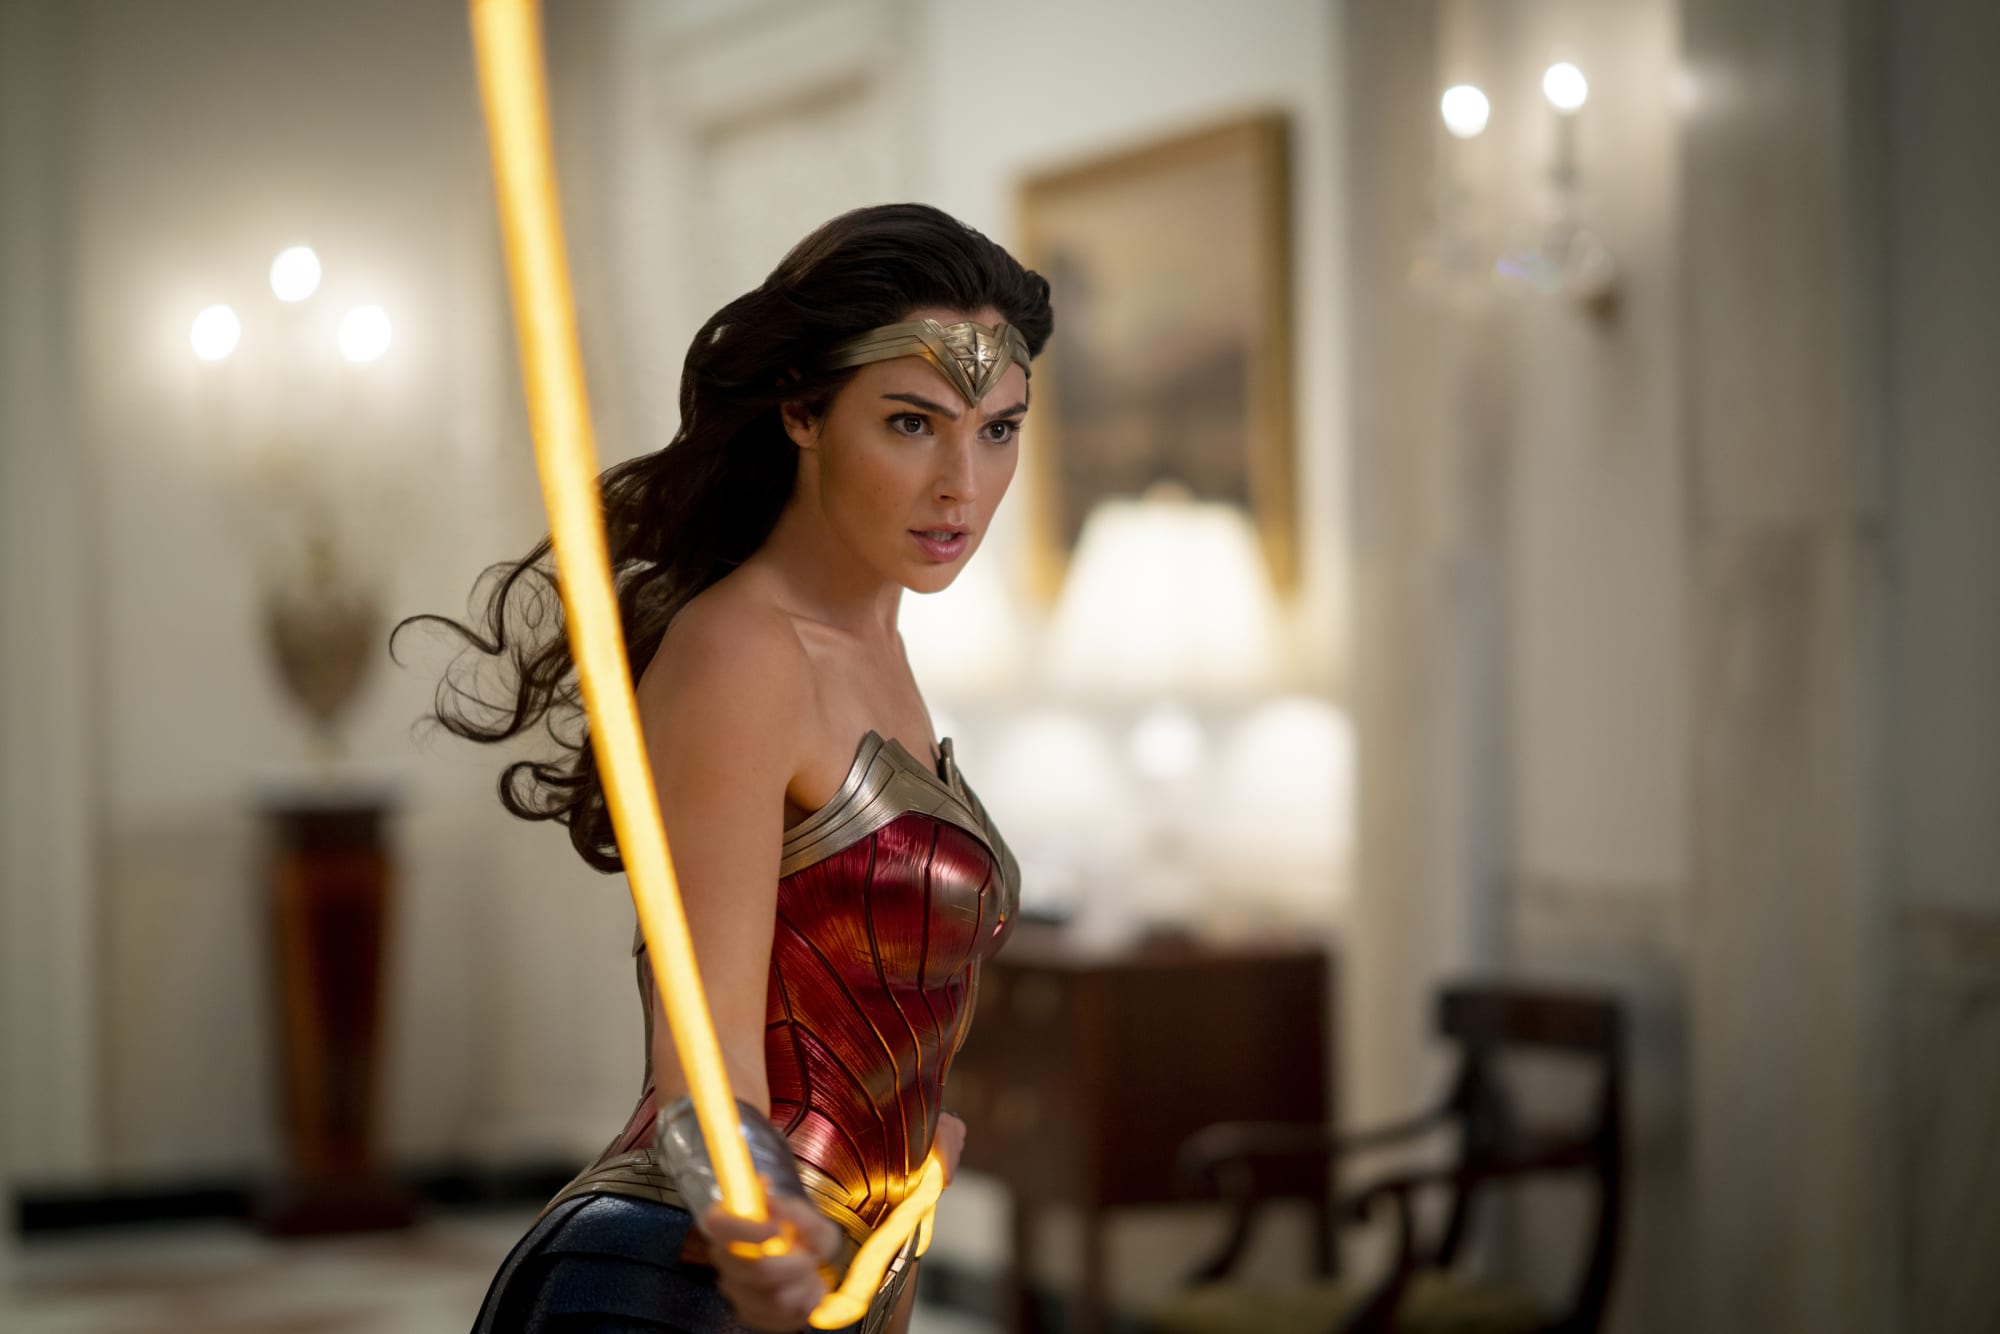 Is Gal Gadot the right actress to play Wonder Woman? - Quora